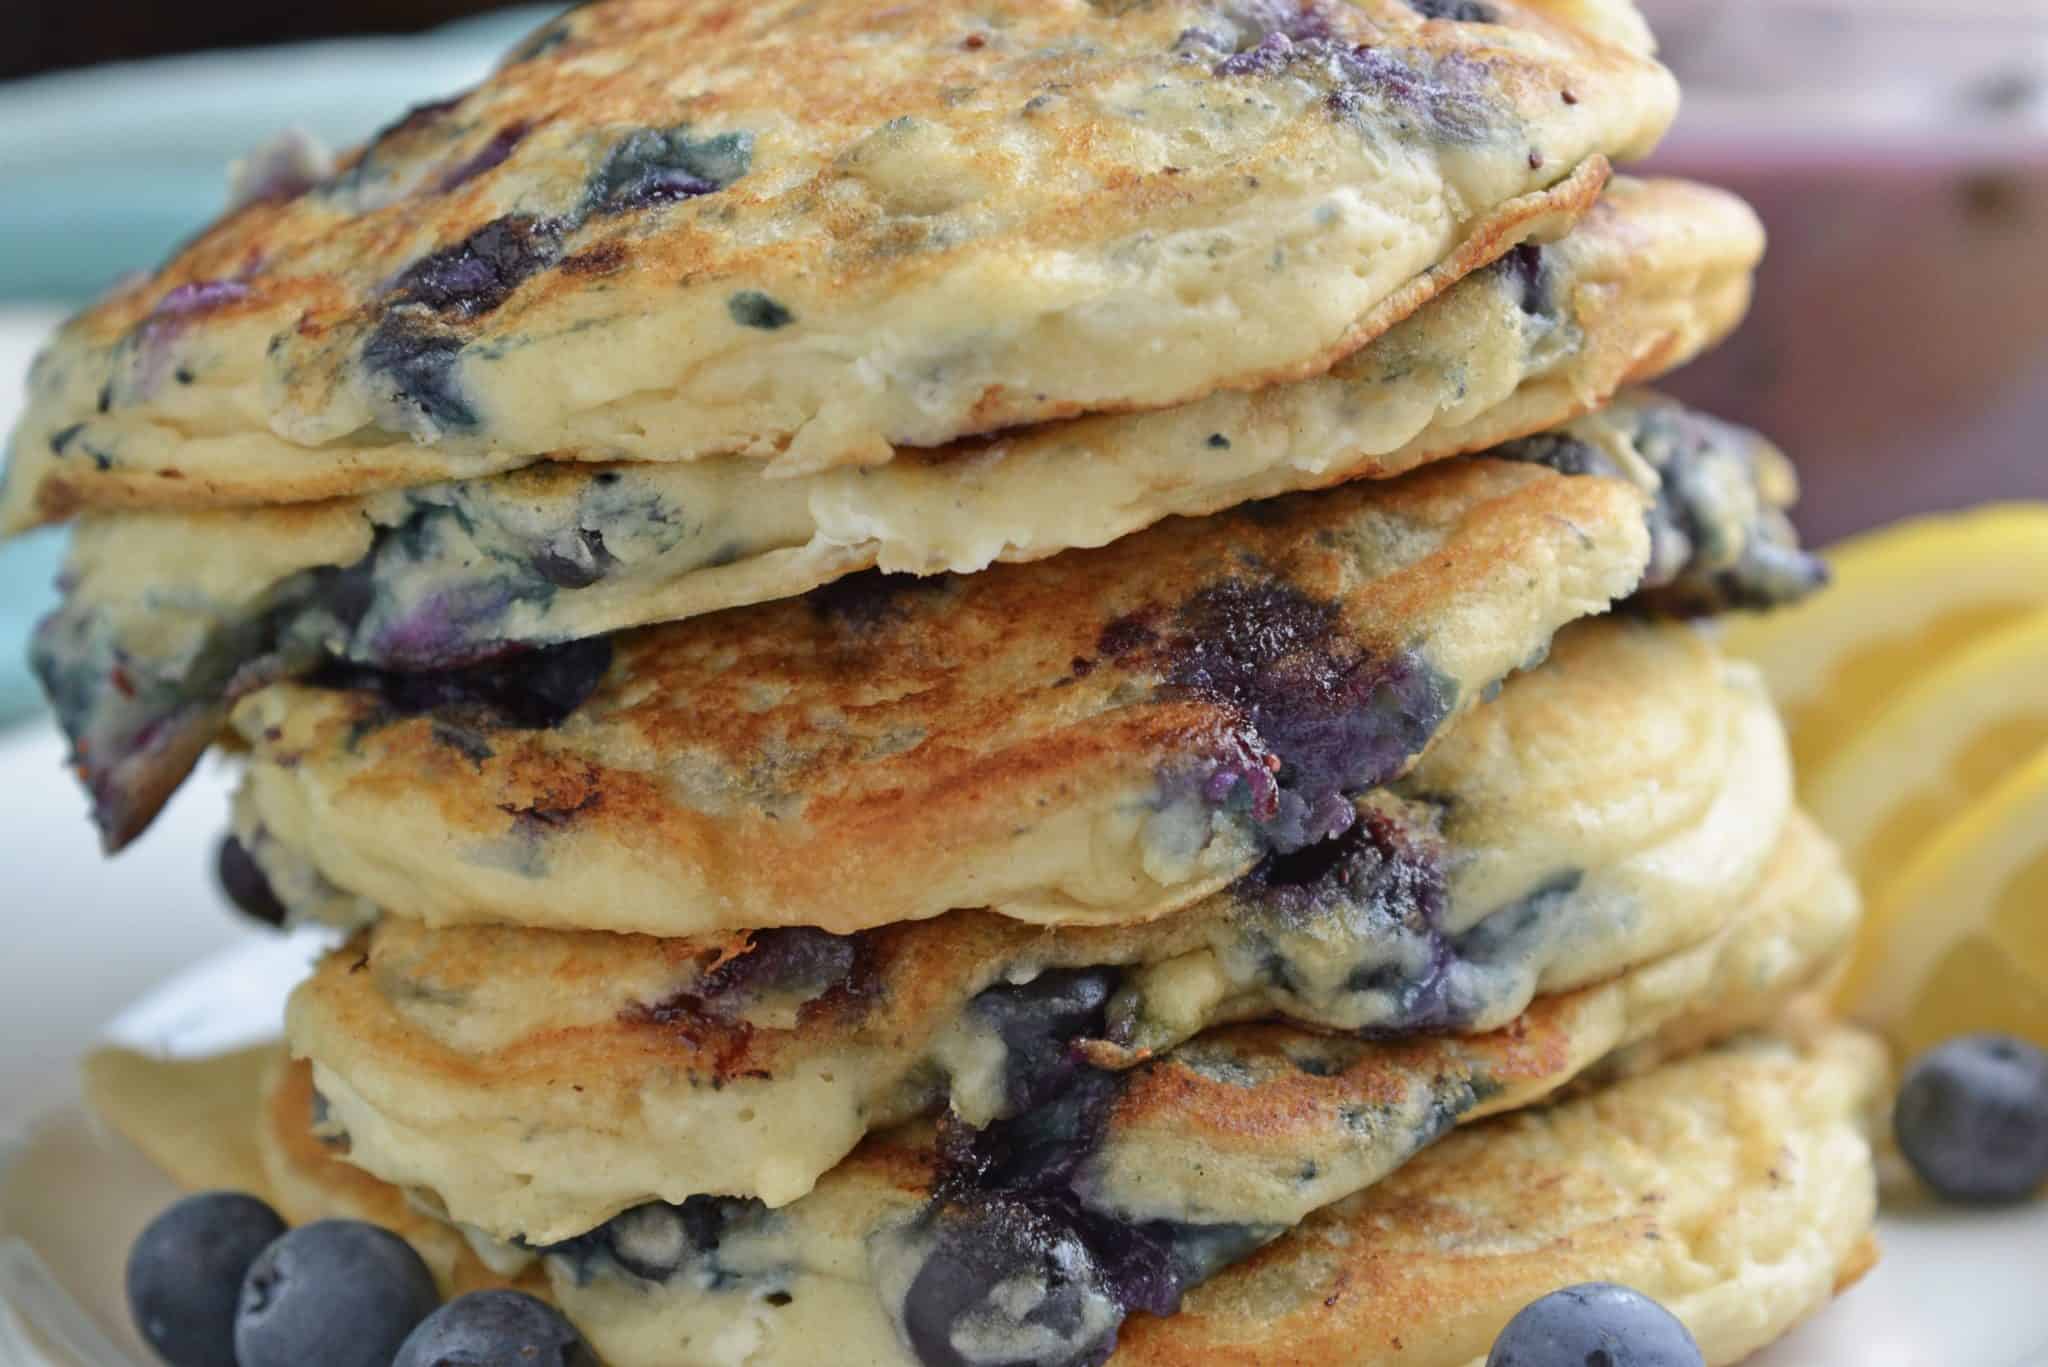 Blueberry Lemon Ricotta Pancakes! Make these easy blueberry pancakes with ricotta. Ricotta hotcakes are super fluffy pancakes. Best pancakes from scratch! #lemonricottapancakes #bestblueberrypancakes www.savoryexperiments.com